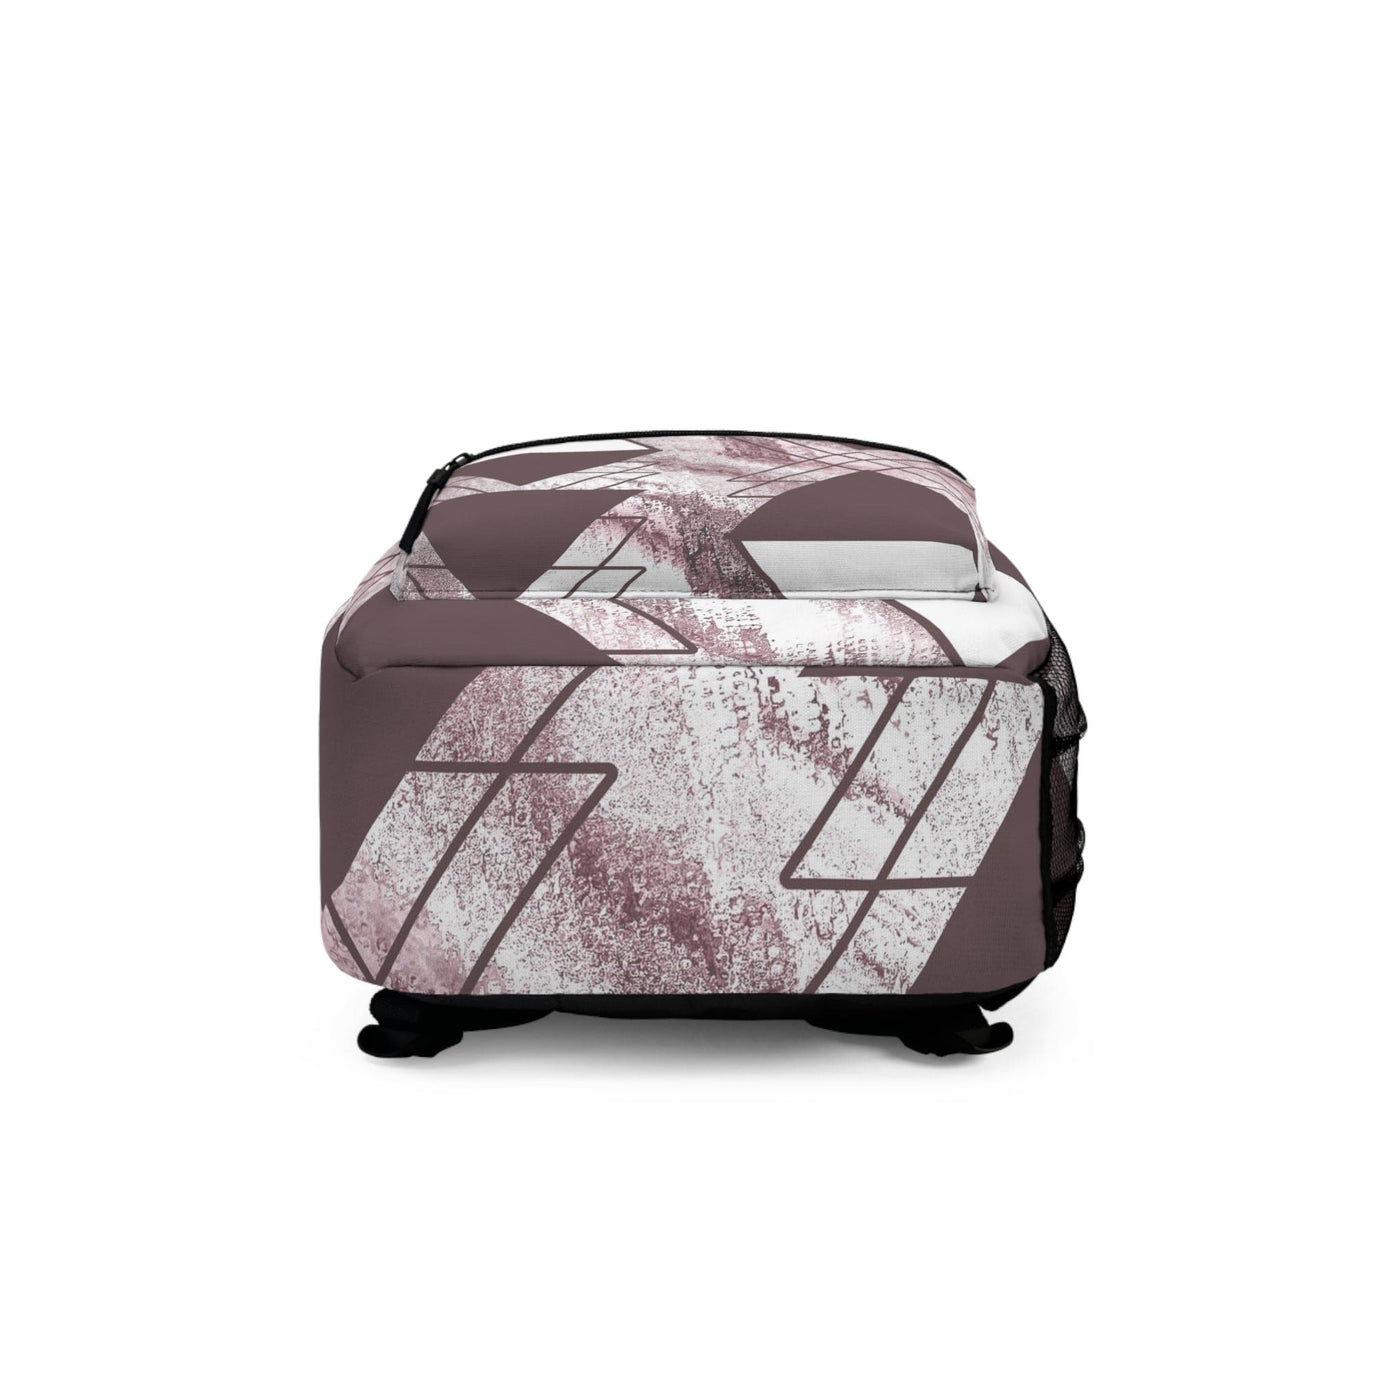 Backpack - Large Water-resistant Bag Mauve Rose And White Triangular Colorblock